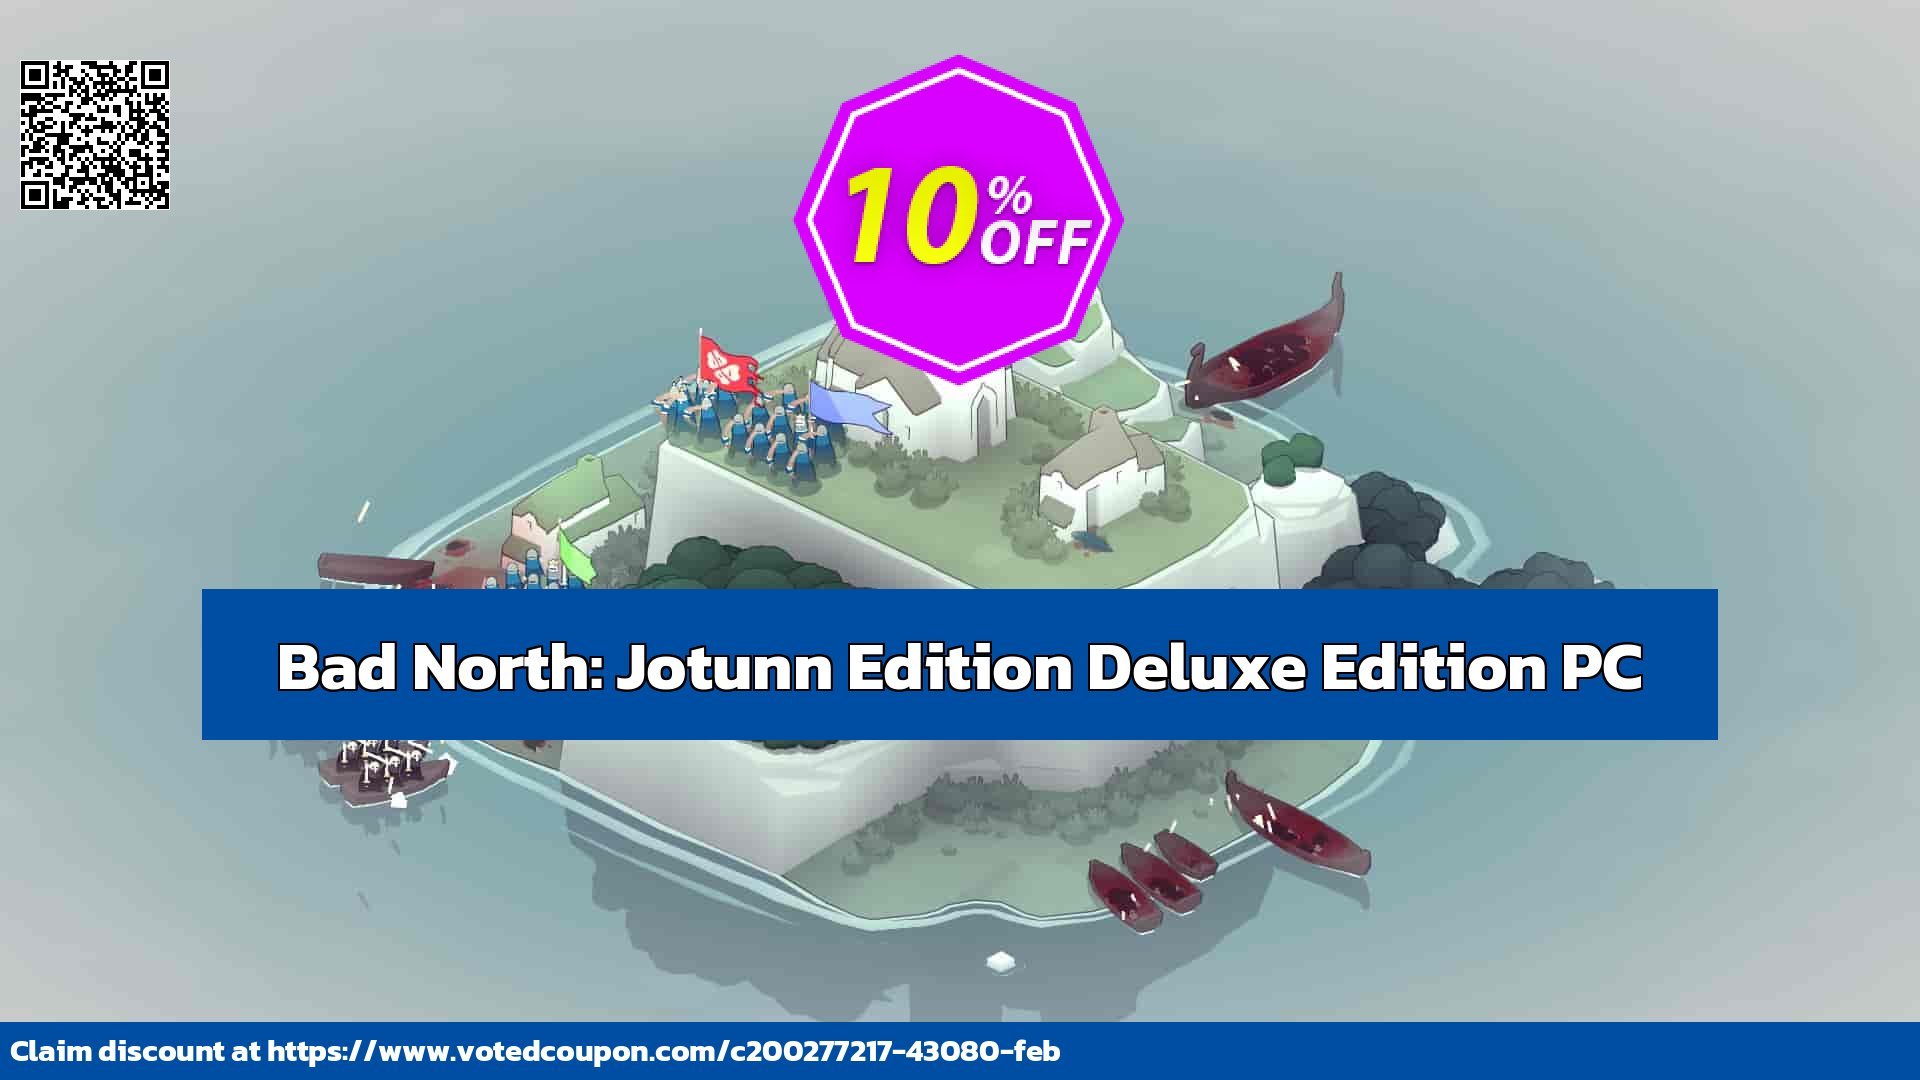 Bad North: Jotunn Edition Deluxe Edition PC Coupon Code May 2024, 10% OFF - VotedCoupon